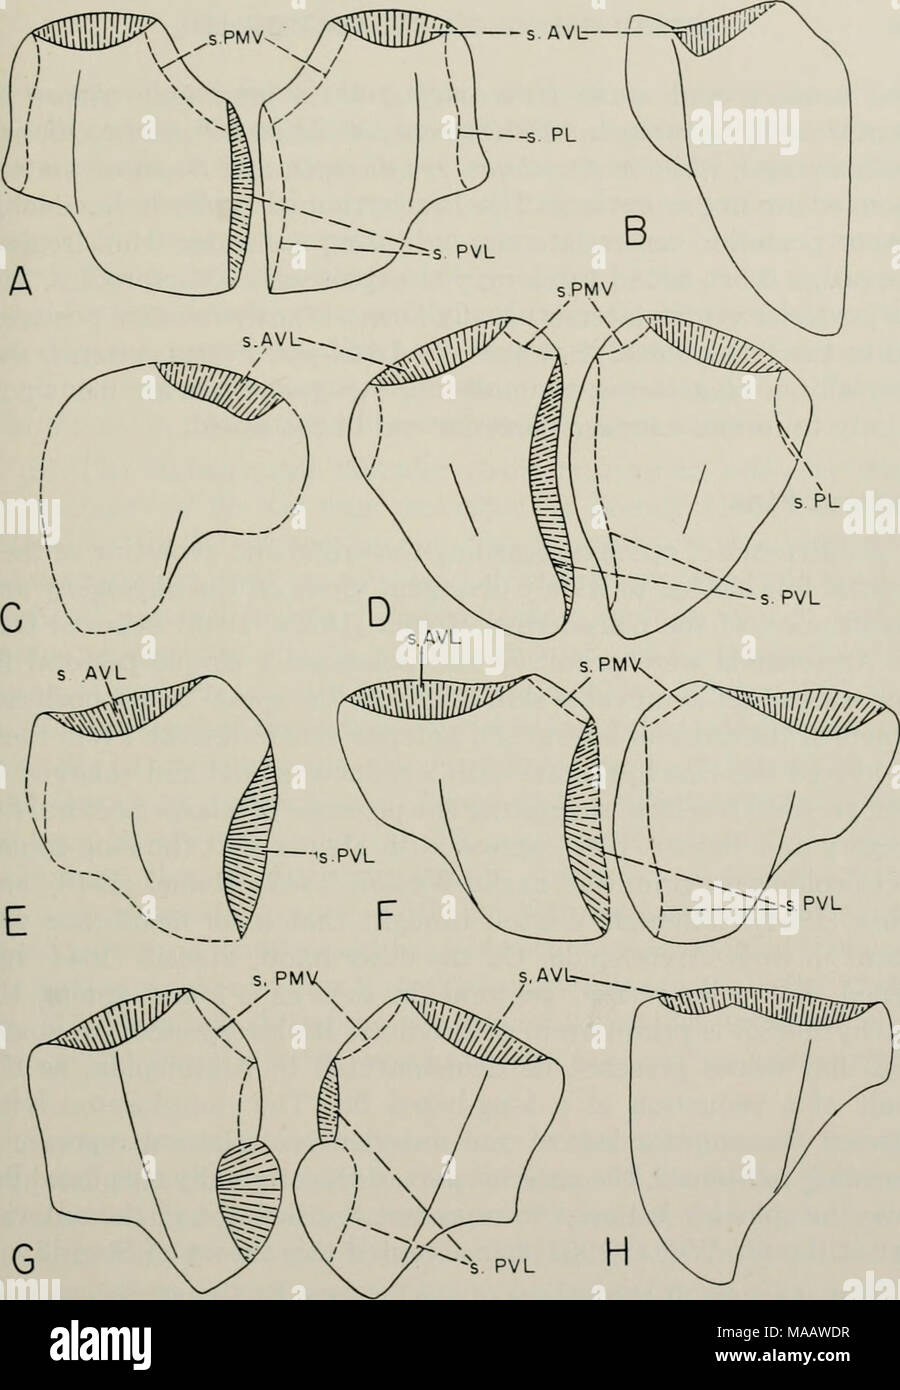 . Early Devonian fishes from Utah : Arthrodira . Fig. 114. Posterior ventro-lateral plates of Arctolepida, flattened and all reduced to the same area. A, Phlyclaenaspis acadica, modified from Heintz, 1933 (X 0.6); B, Anarthraspis sp., right PVL, from Bryant, 1934 (X 0.7); C, Aeihaspis major, left PVL, restored from PF 913 (X 0.4); D, Bryantolepis sp., restored from PF 166, 1546, 1547 (X 1.4); E, Aeihaspis utahensis, right PVL, restored from PF 322 (X 0.8); F, Kujdanowiaspis sp., based on casts of Podolian specimens, PF 1177, 1179 (X 1.6); G, Prosphymaspis subtilis, from Gross, 1937 (X 1.6); H, Stock Photo